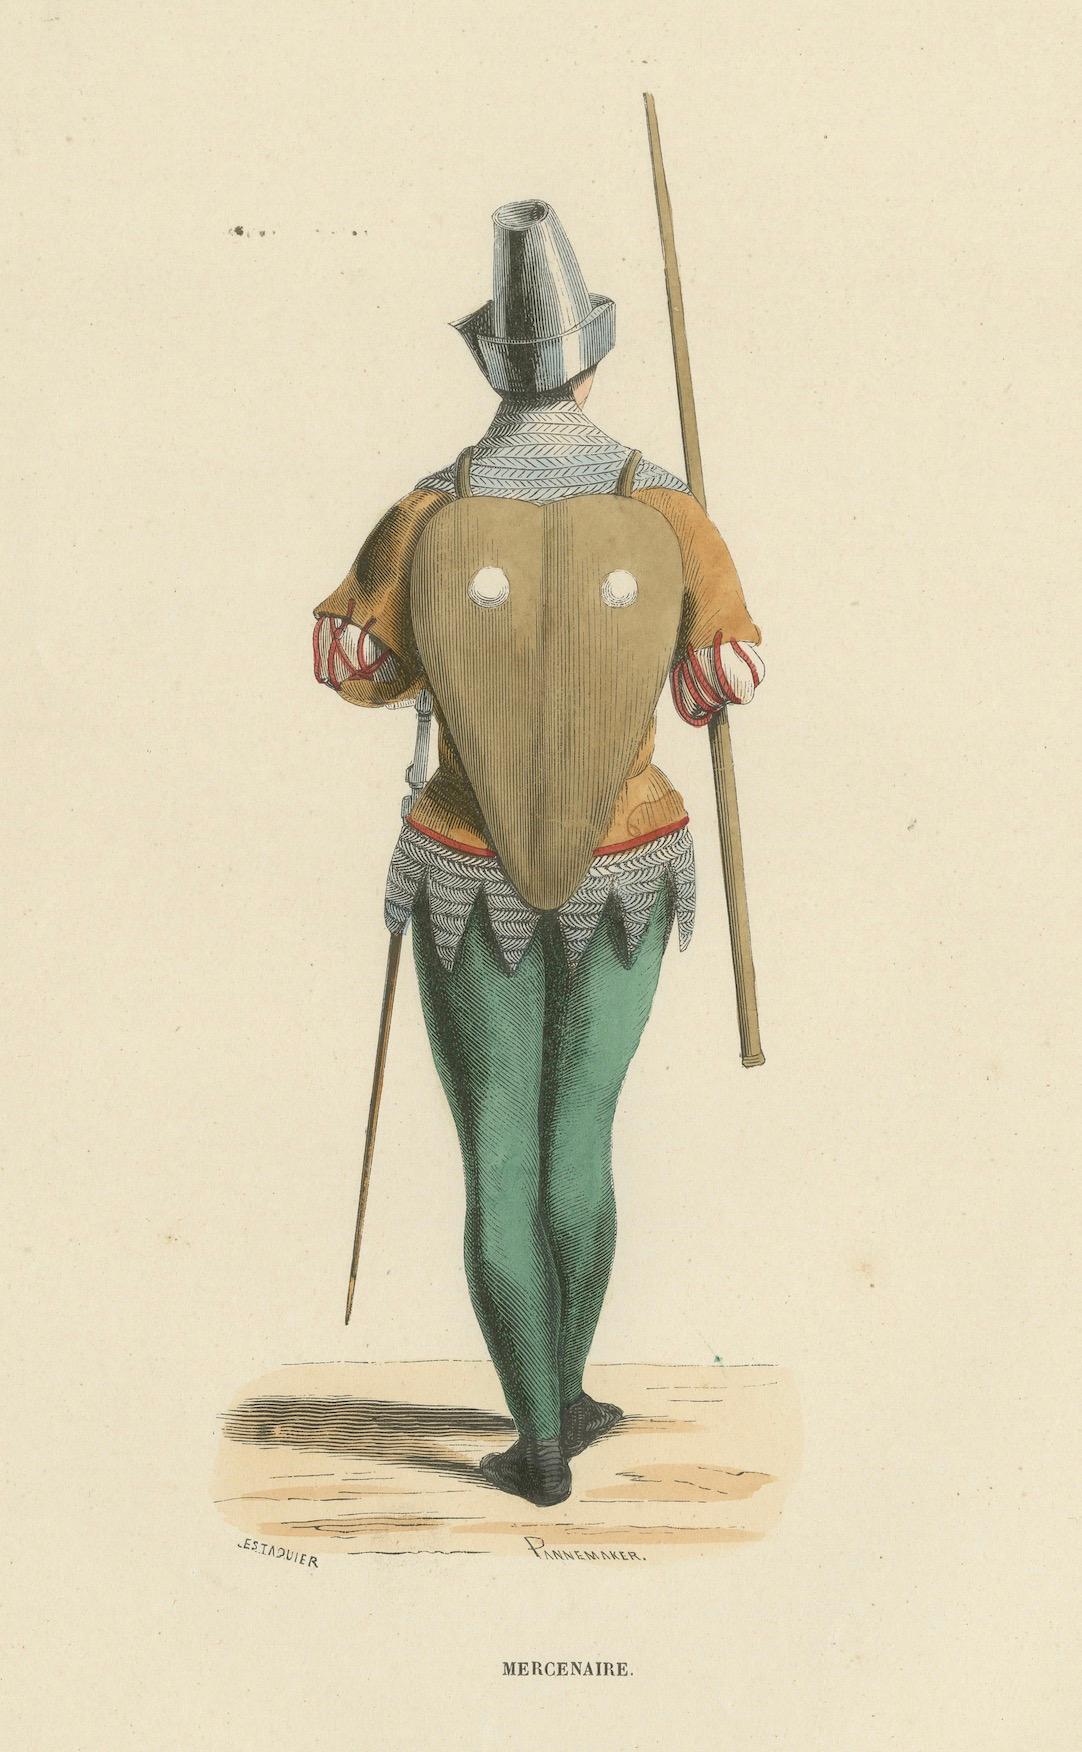 Paper The Mercenary's Garb: Armor and Attire in 'Costume du Moyen Âge, 1847 For Sale